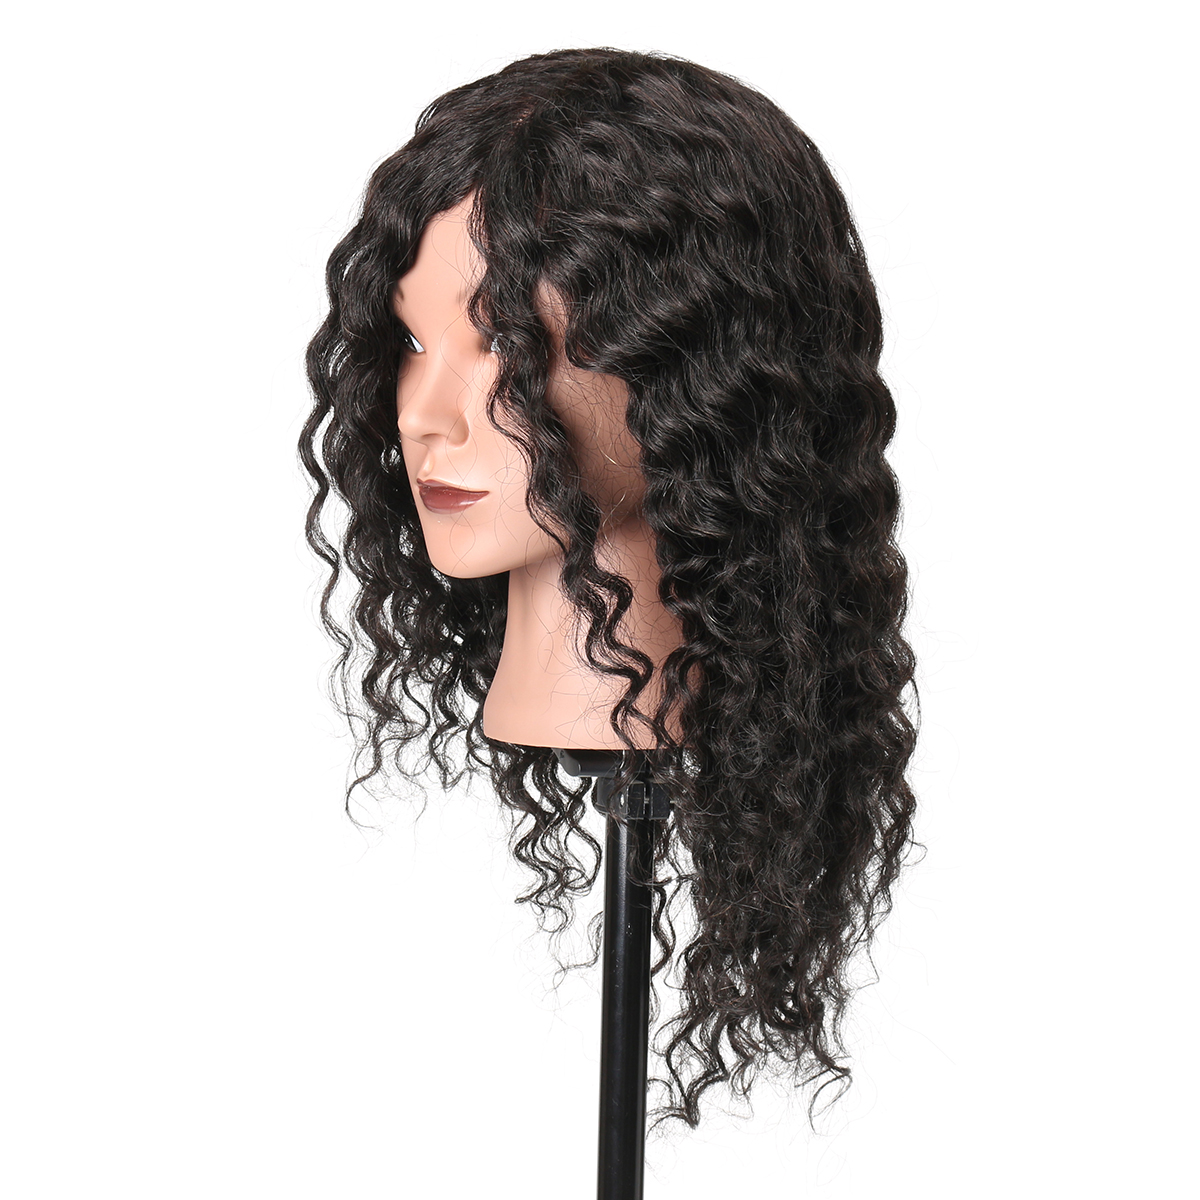 18-100-Real-Human-Hair-Salon-Hairdressing-Training-Practice-Mannequin-Head-1384713